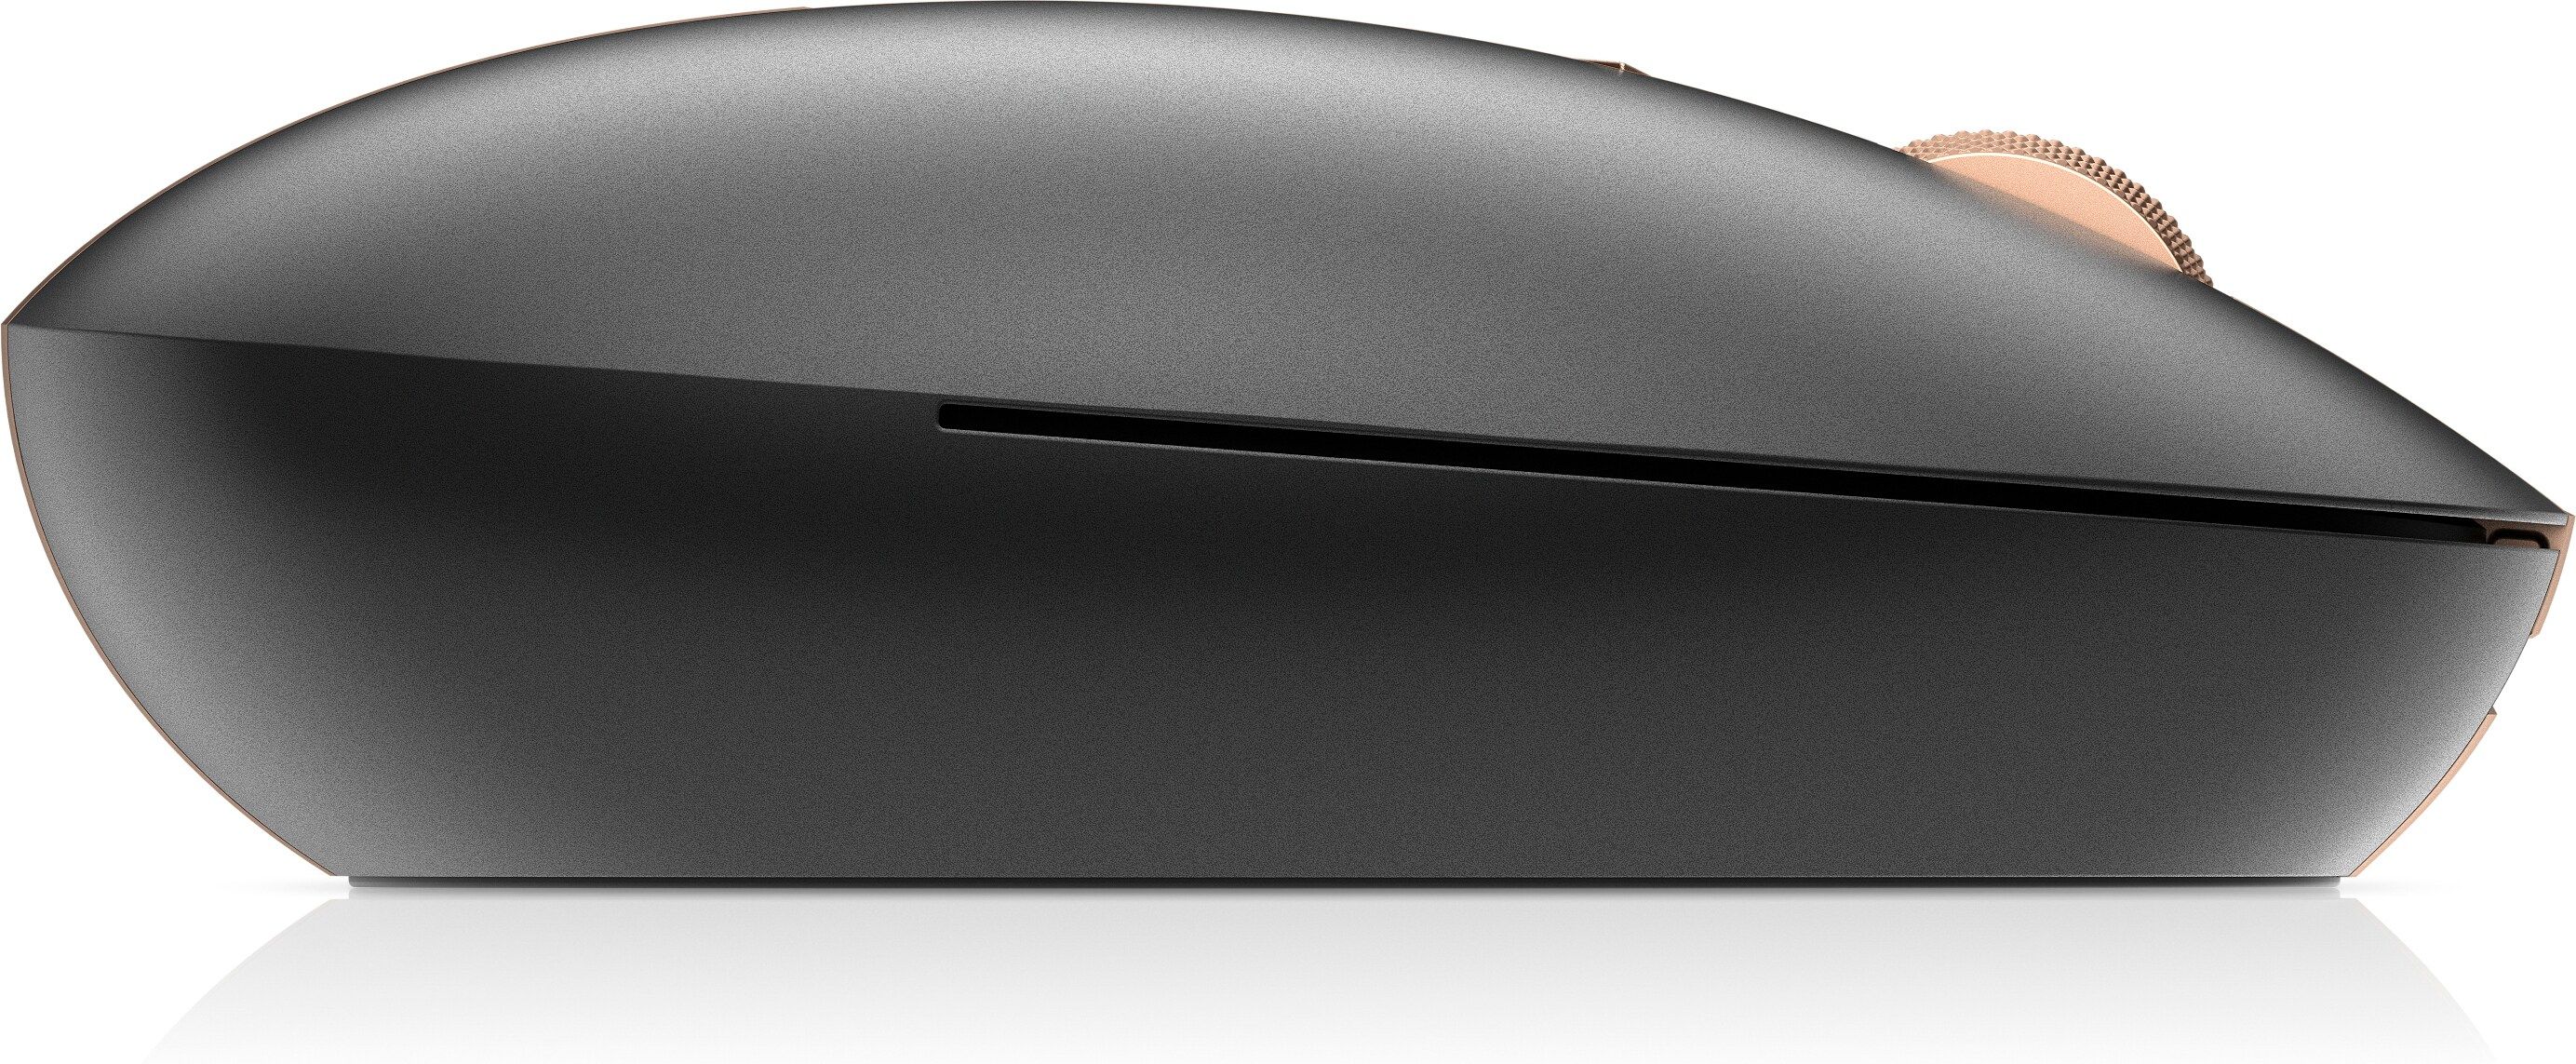 HP Spectre Rechargeable Mouse 700_10